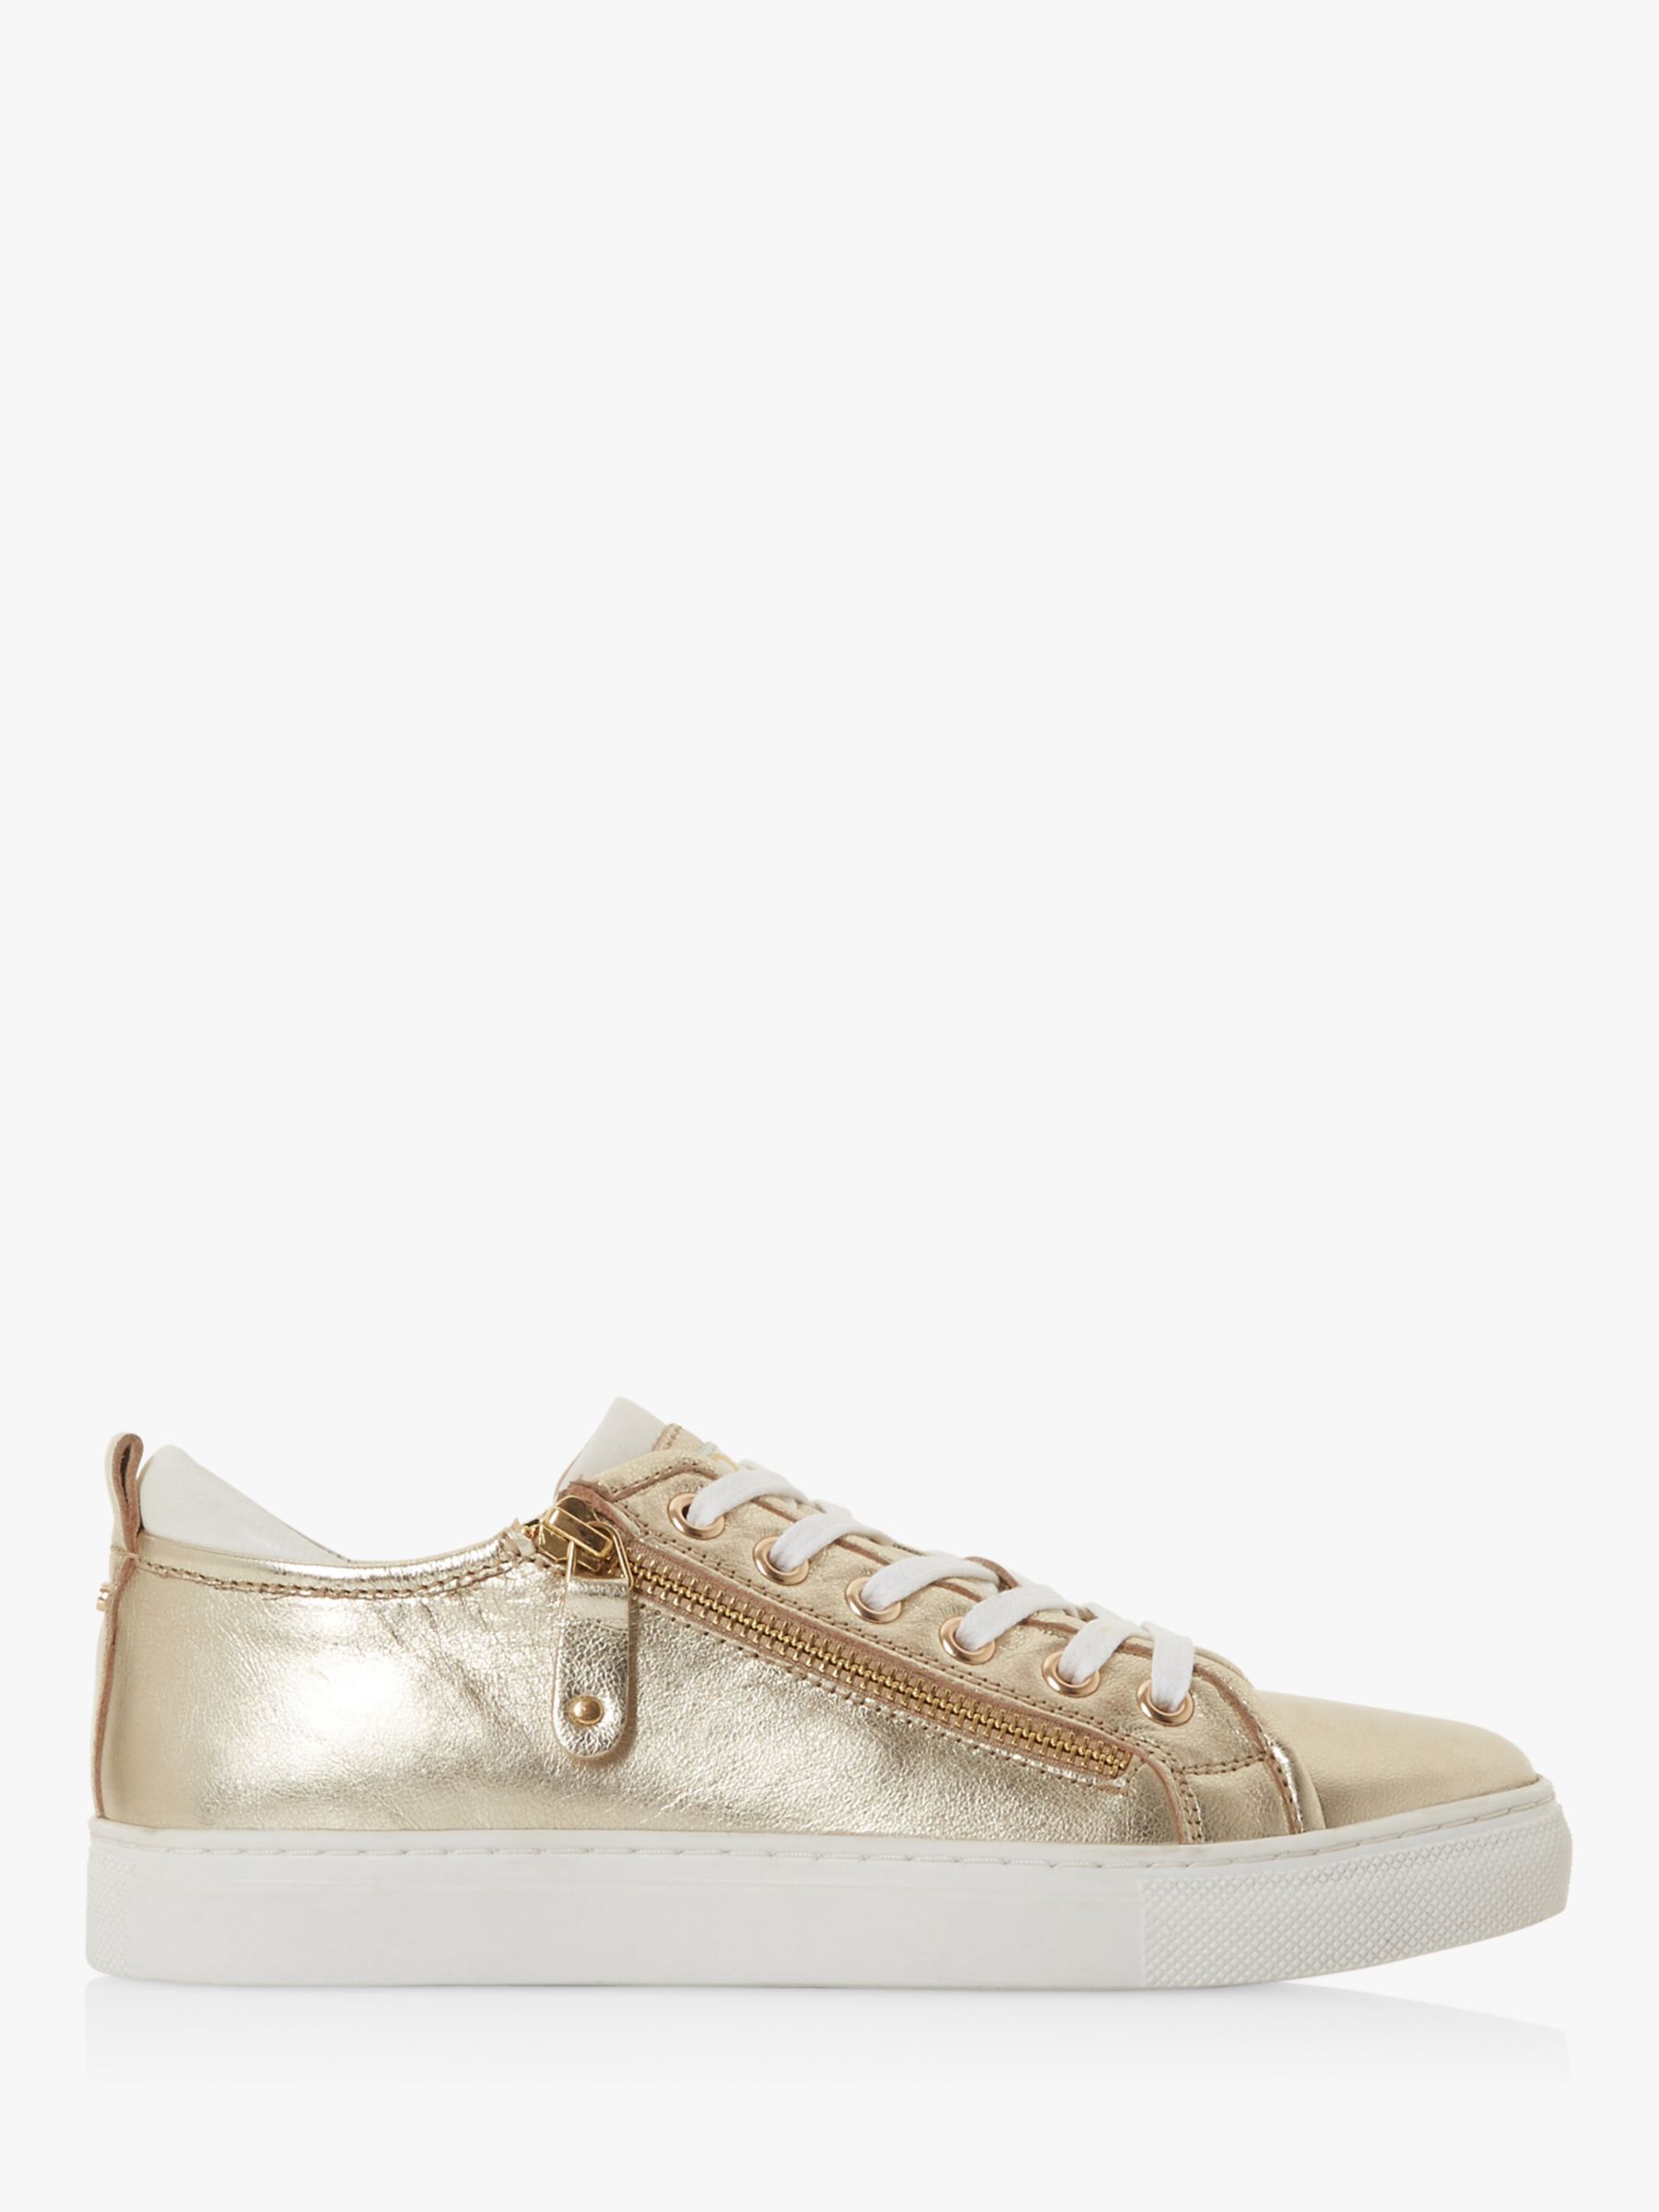 Dune Elicia Leather Side Zip Trainers, Gold